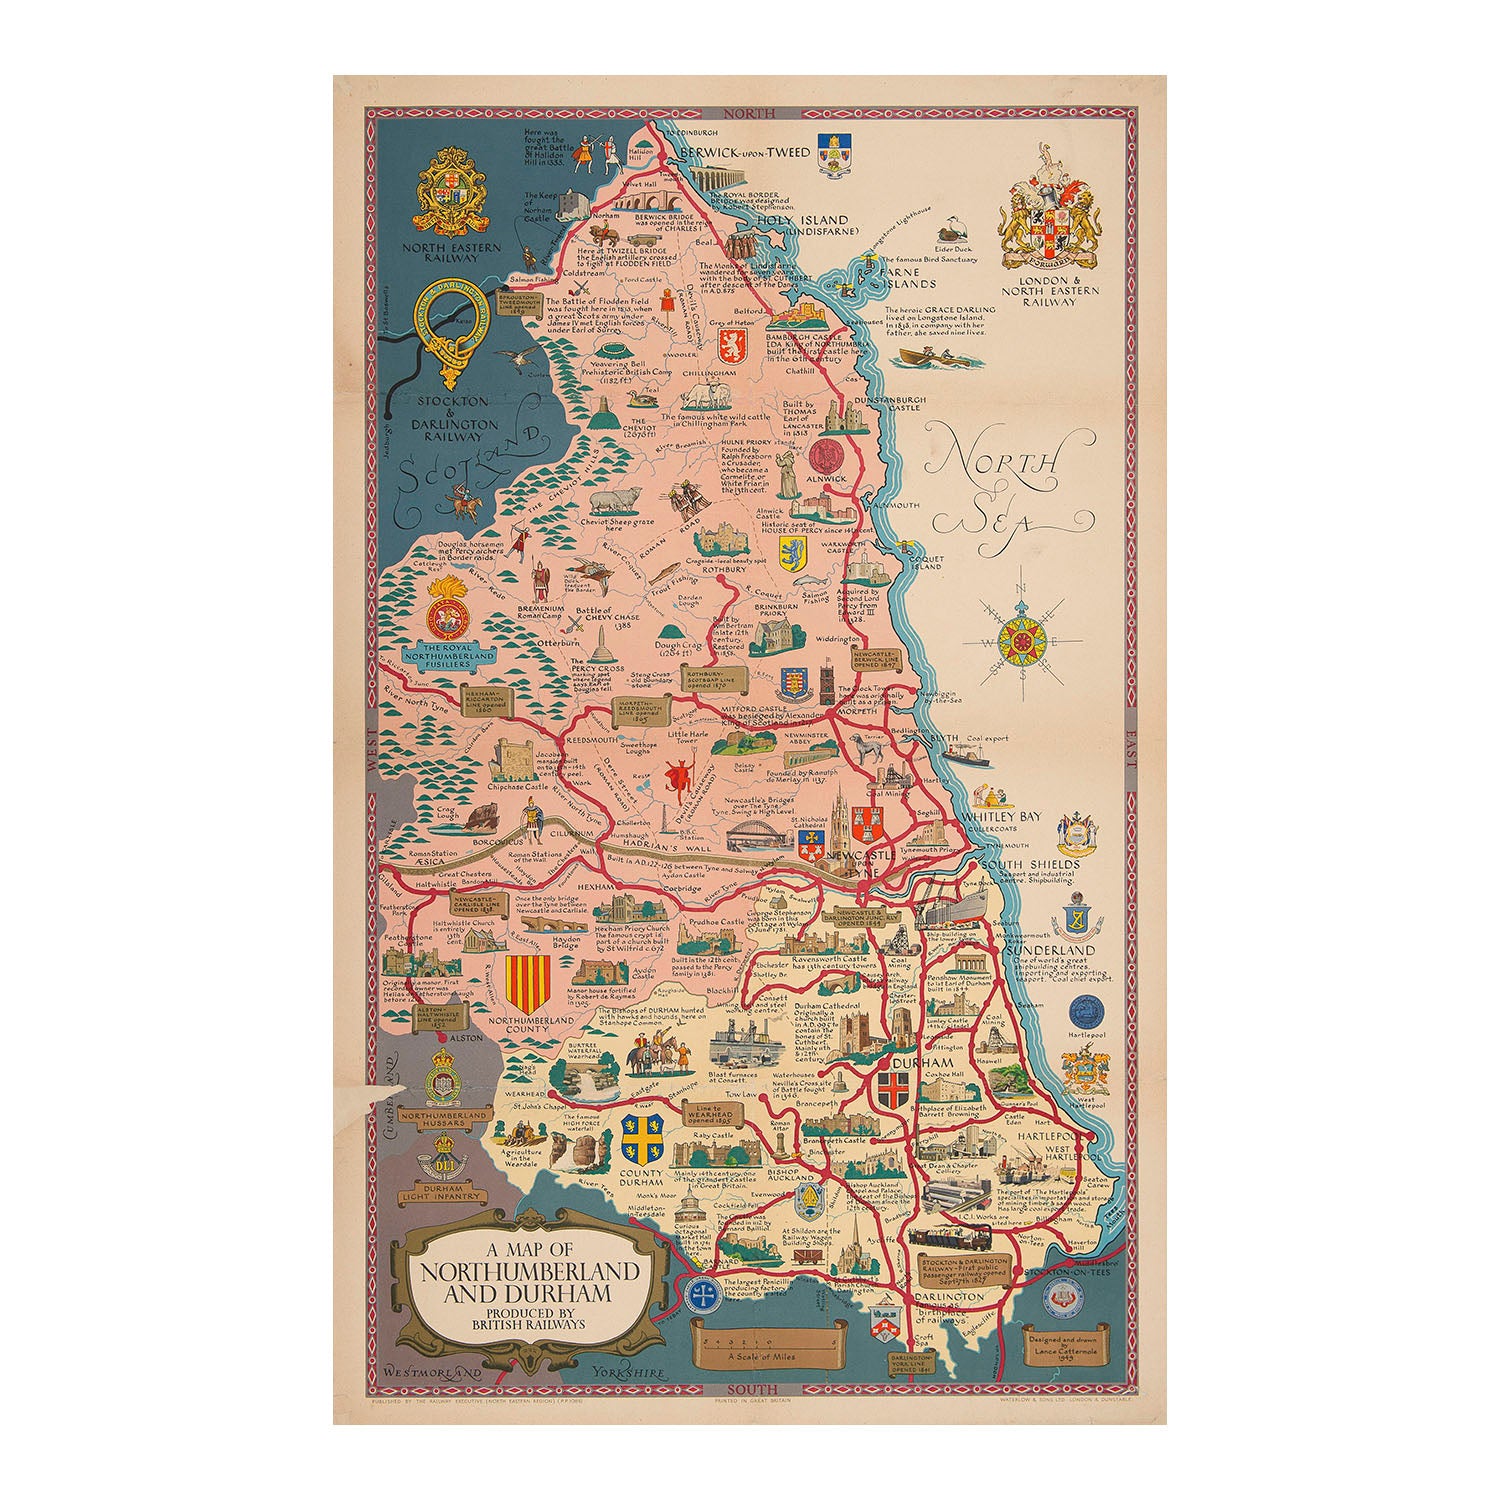 British Railways (North Eastern Region) poster, A Map of Northumberland and Durham, by Lance Cattermole, 1949. A superb example of an illustrated poster map, featuring the regional crests of towns, counties, regiments and railway companies, together with places of interest and depictions of famous events from the region’s history. The poster also celebrates modern industrial achievements as well as historic sites, including Berwick, Bamburgh Castle, Alnwick Castle, Durham